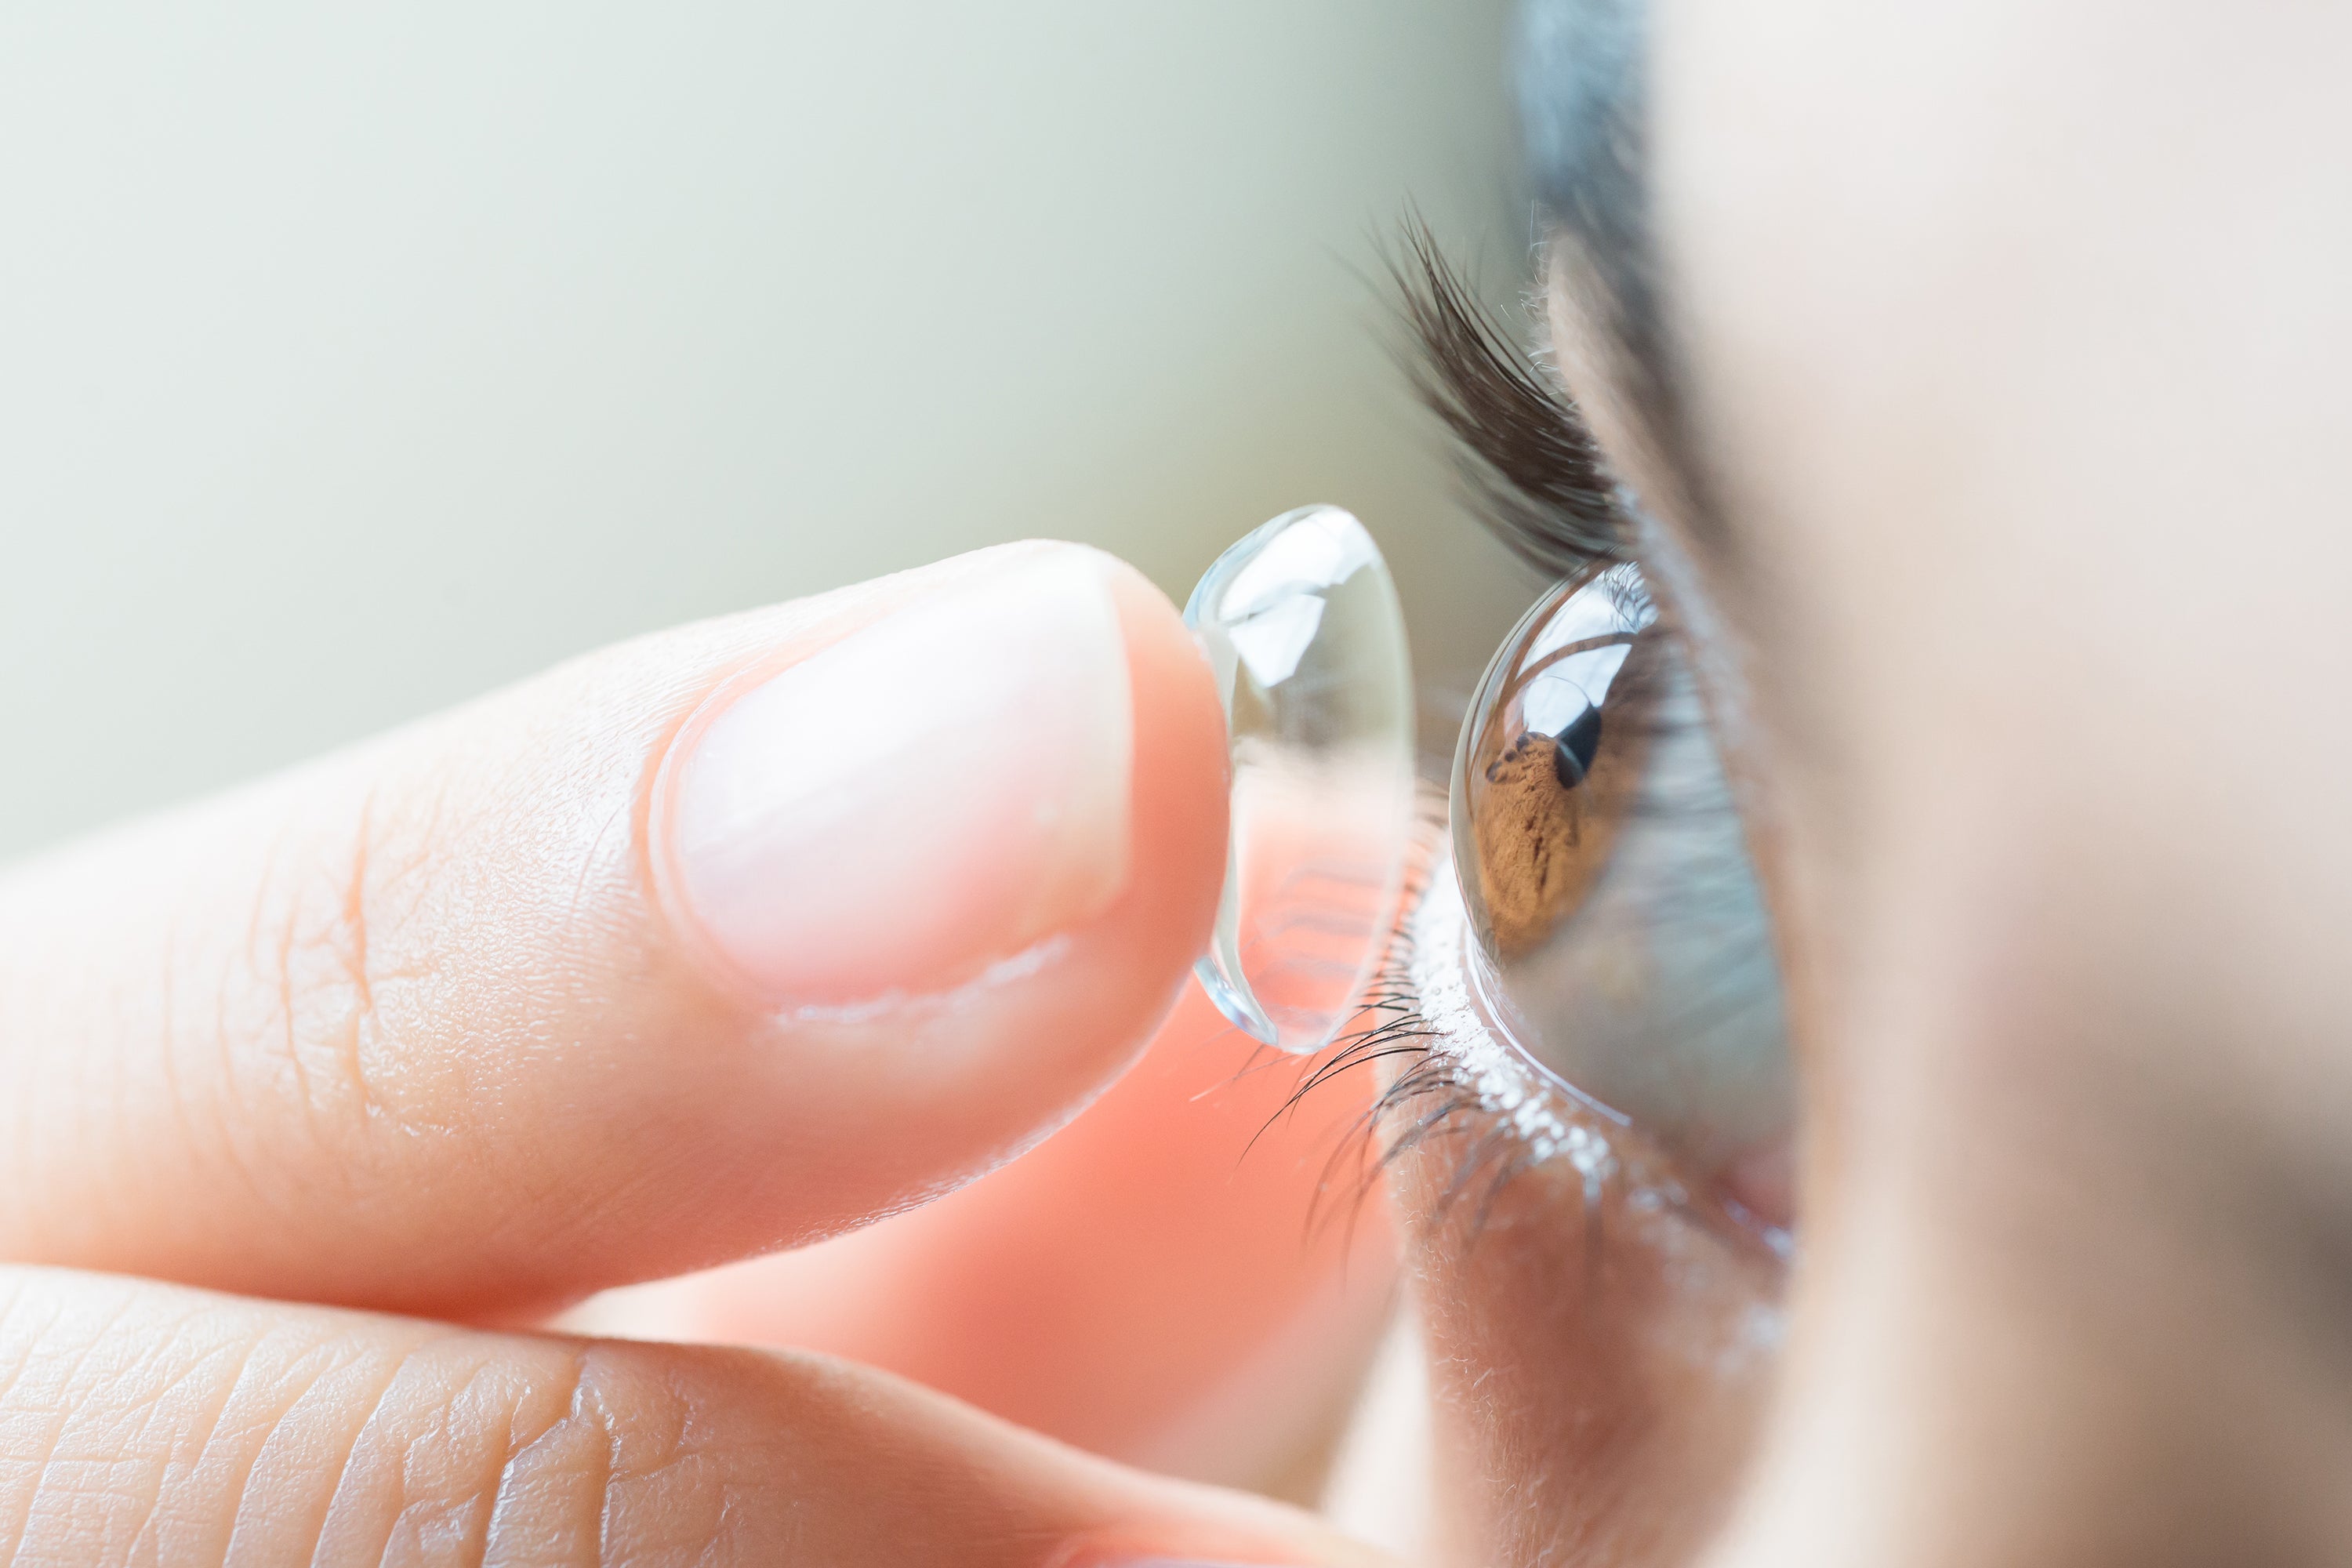 Contact lens wearer? Your morning routine is likely to have been facilitated by ATS equipment